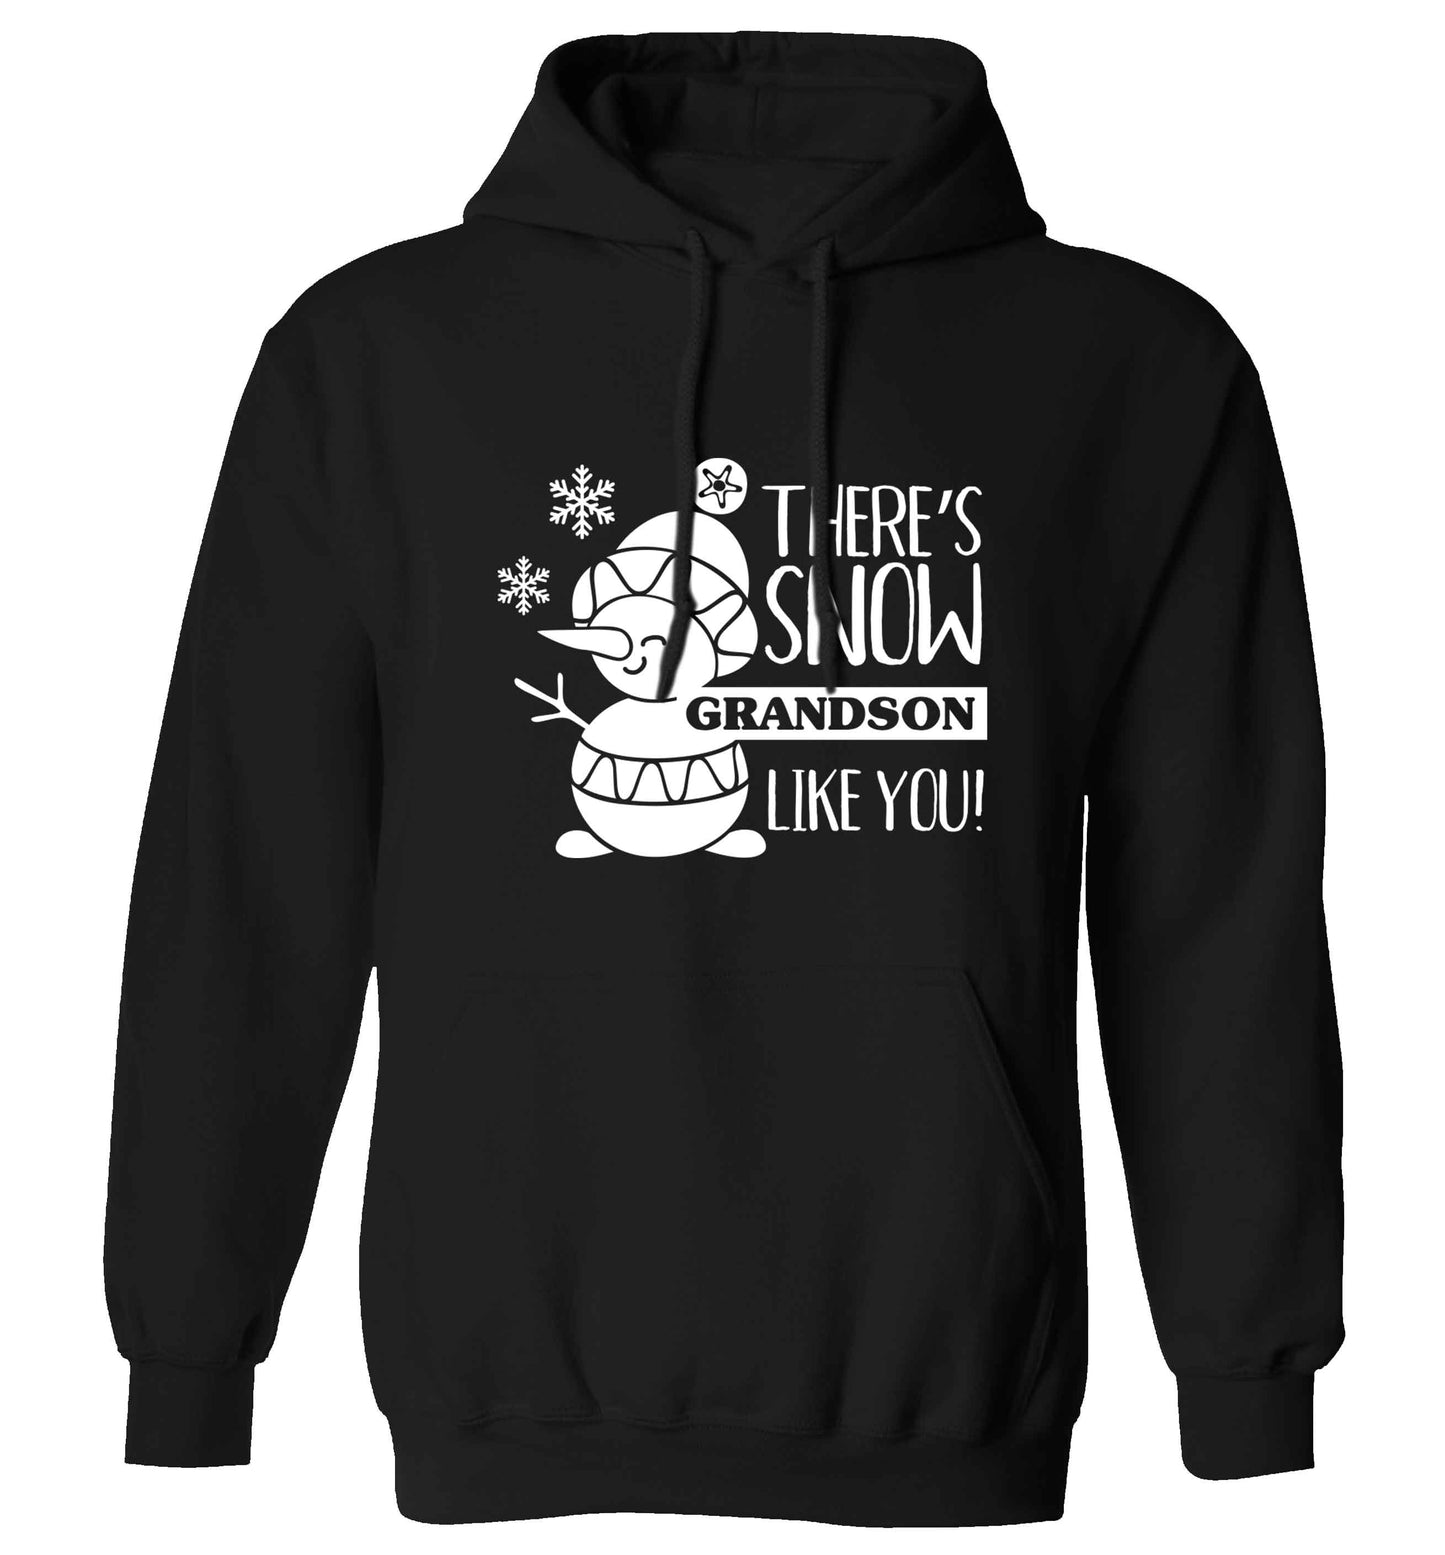 There's snow grandson like you adults unisex black hoodie 2XL